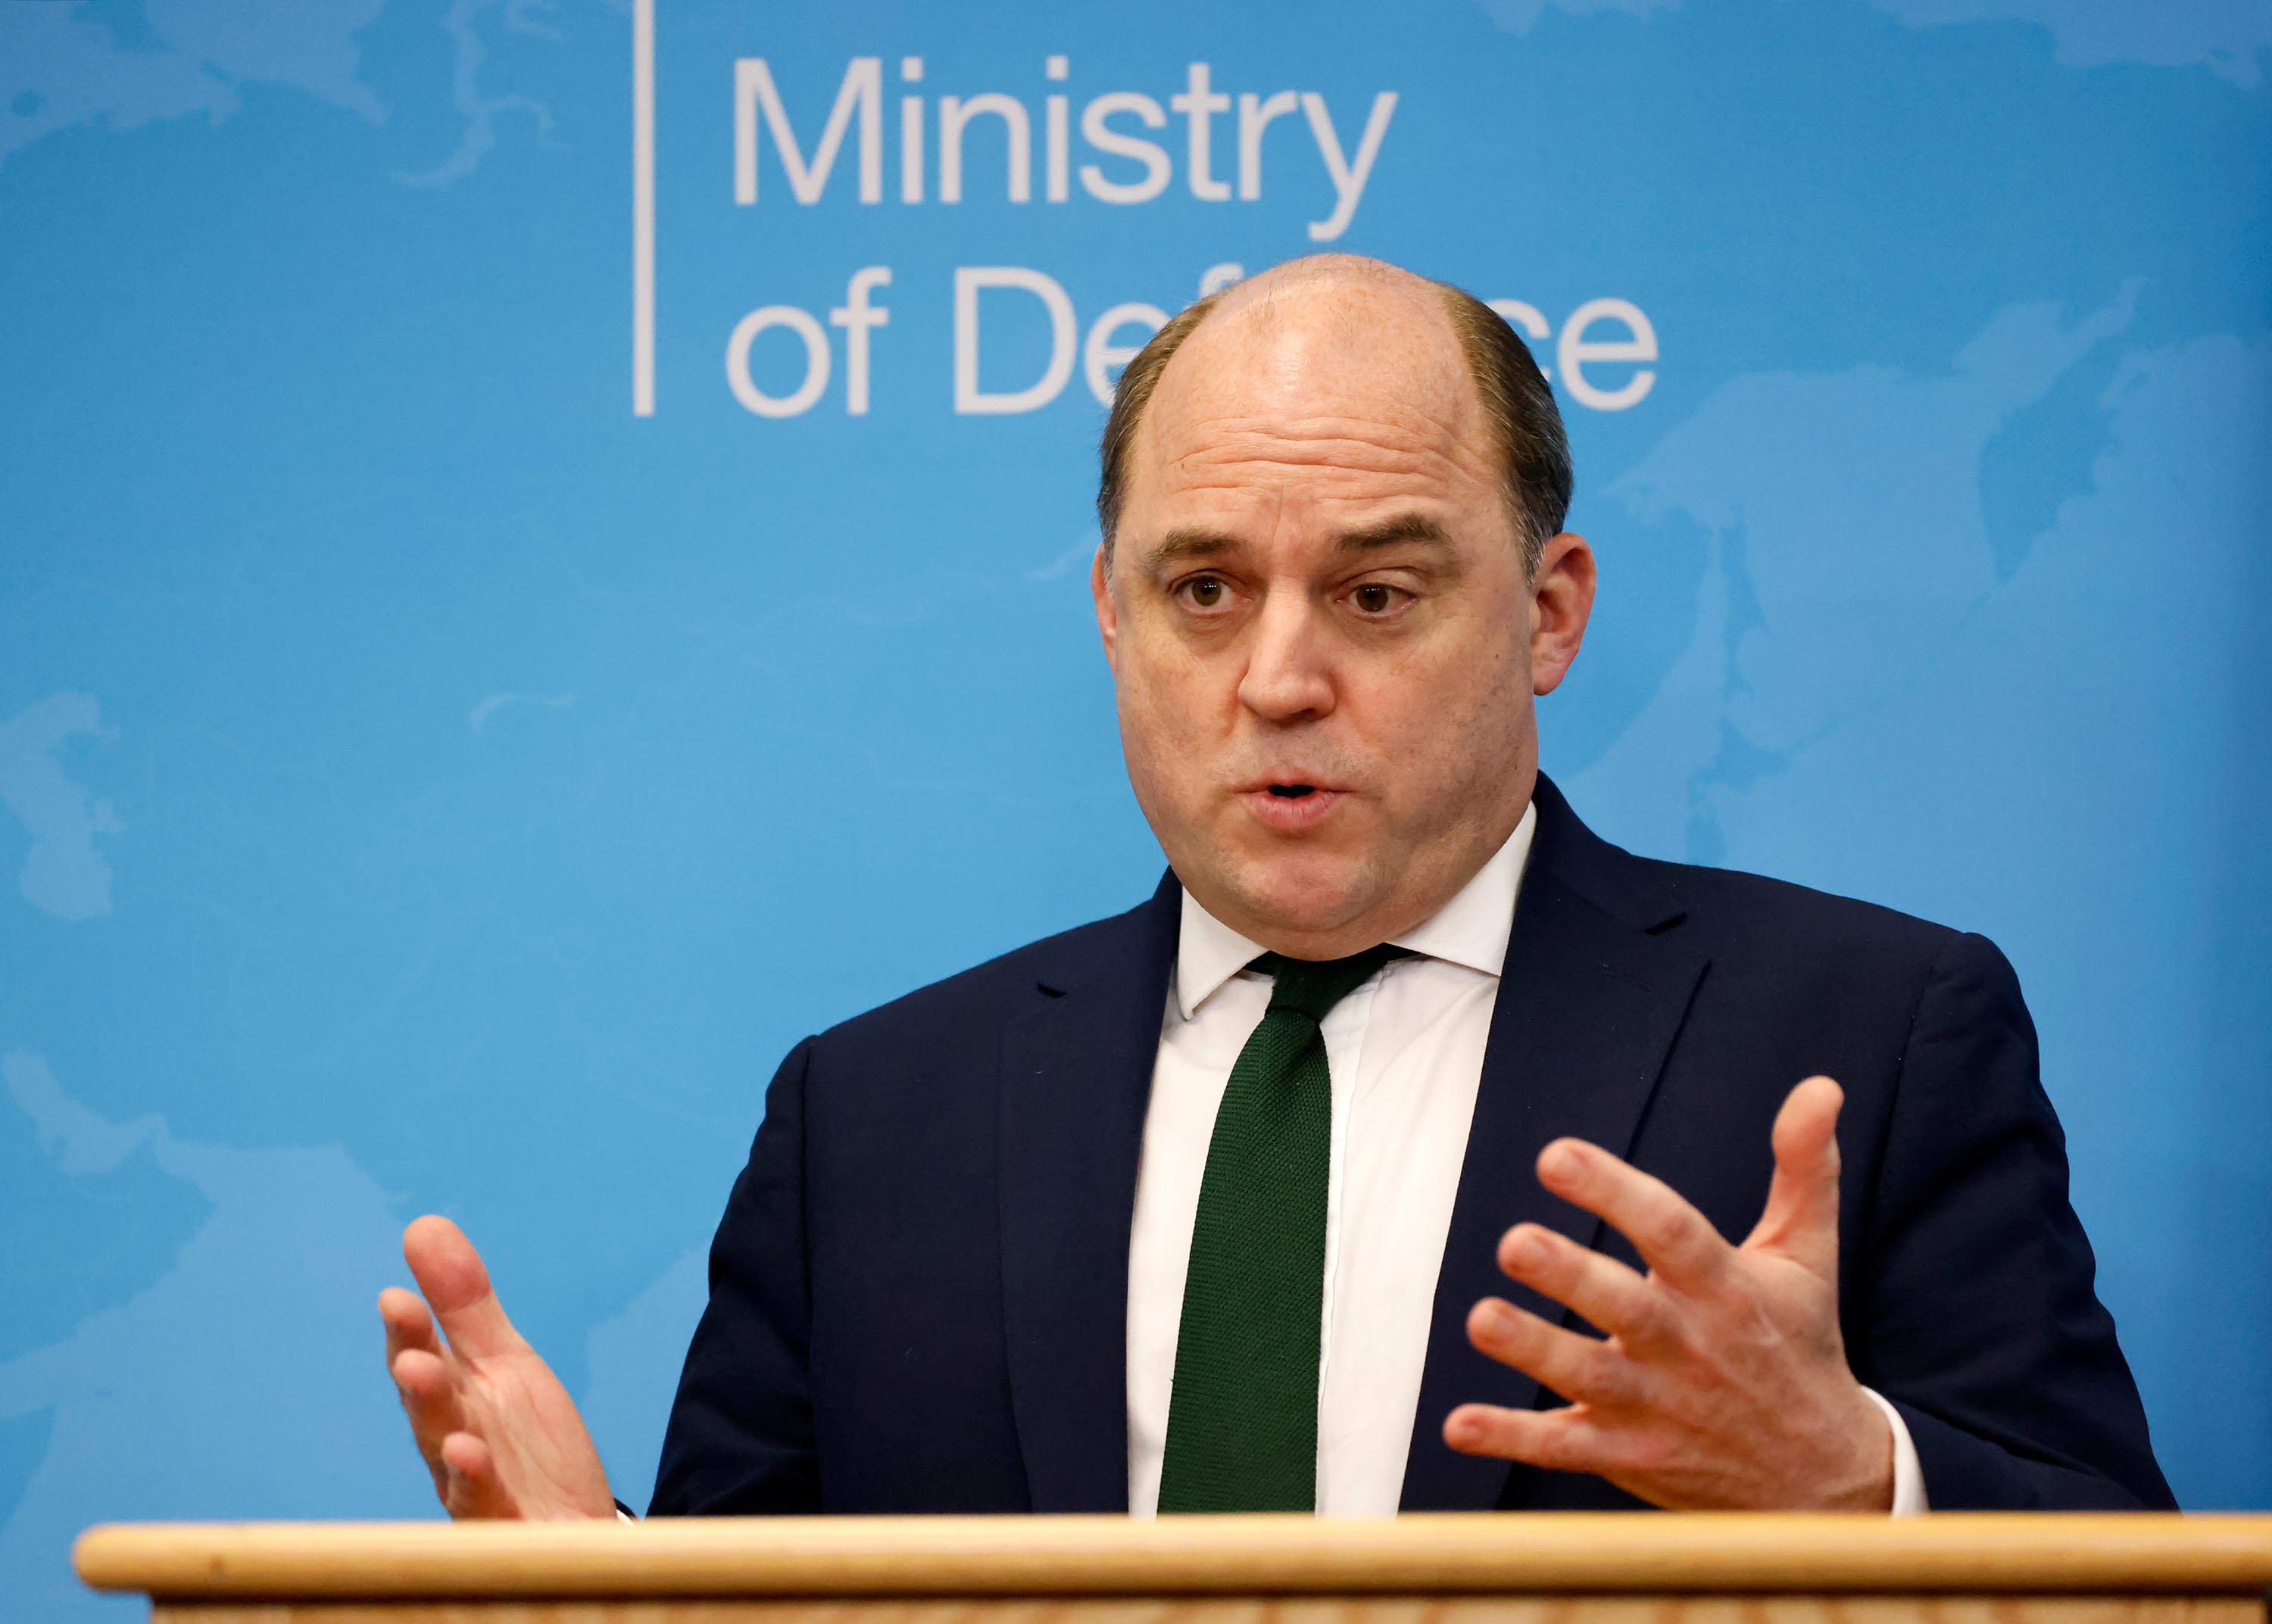 British Defence Secretary Ben Wallace speaks during a joint press conference with Poland's Minister of National Defence Mariusz Blaszczak at the Ministry of Defence Main Building on February 7, 2022 in London, England.